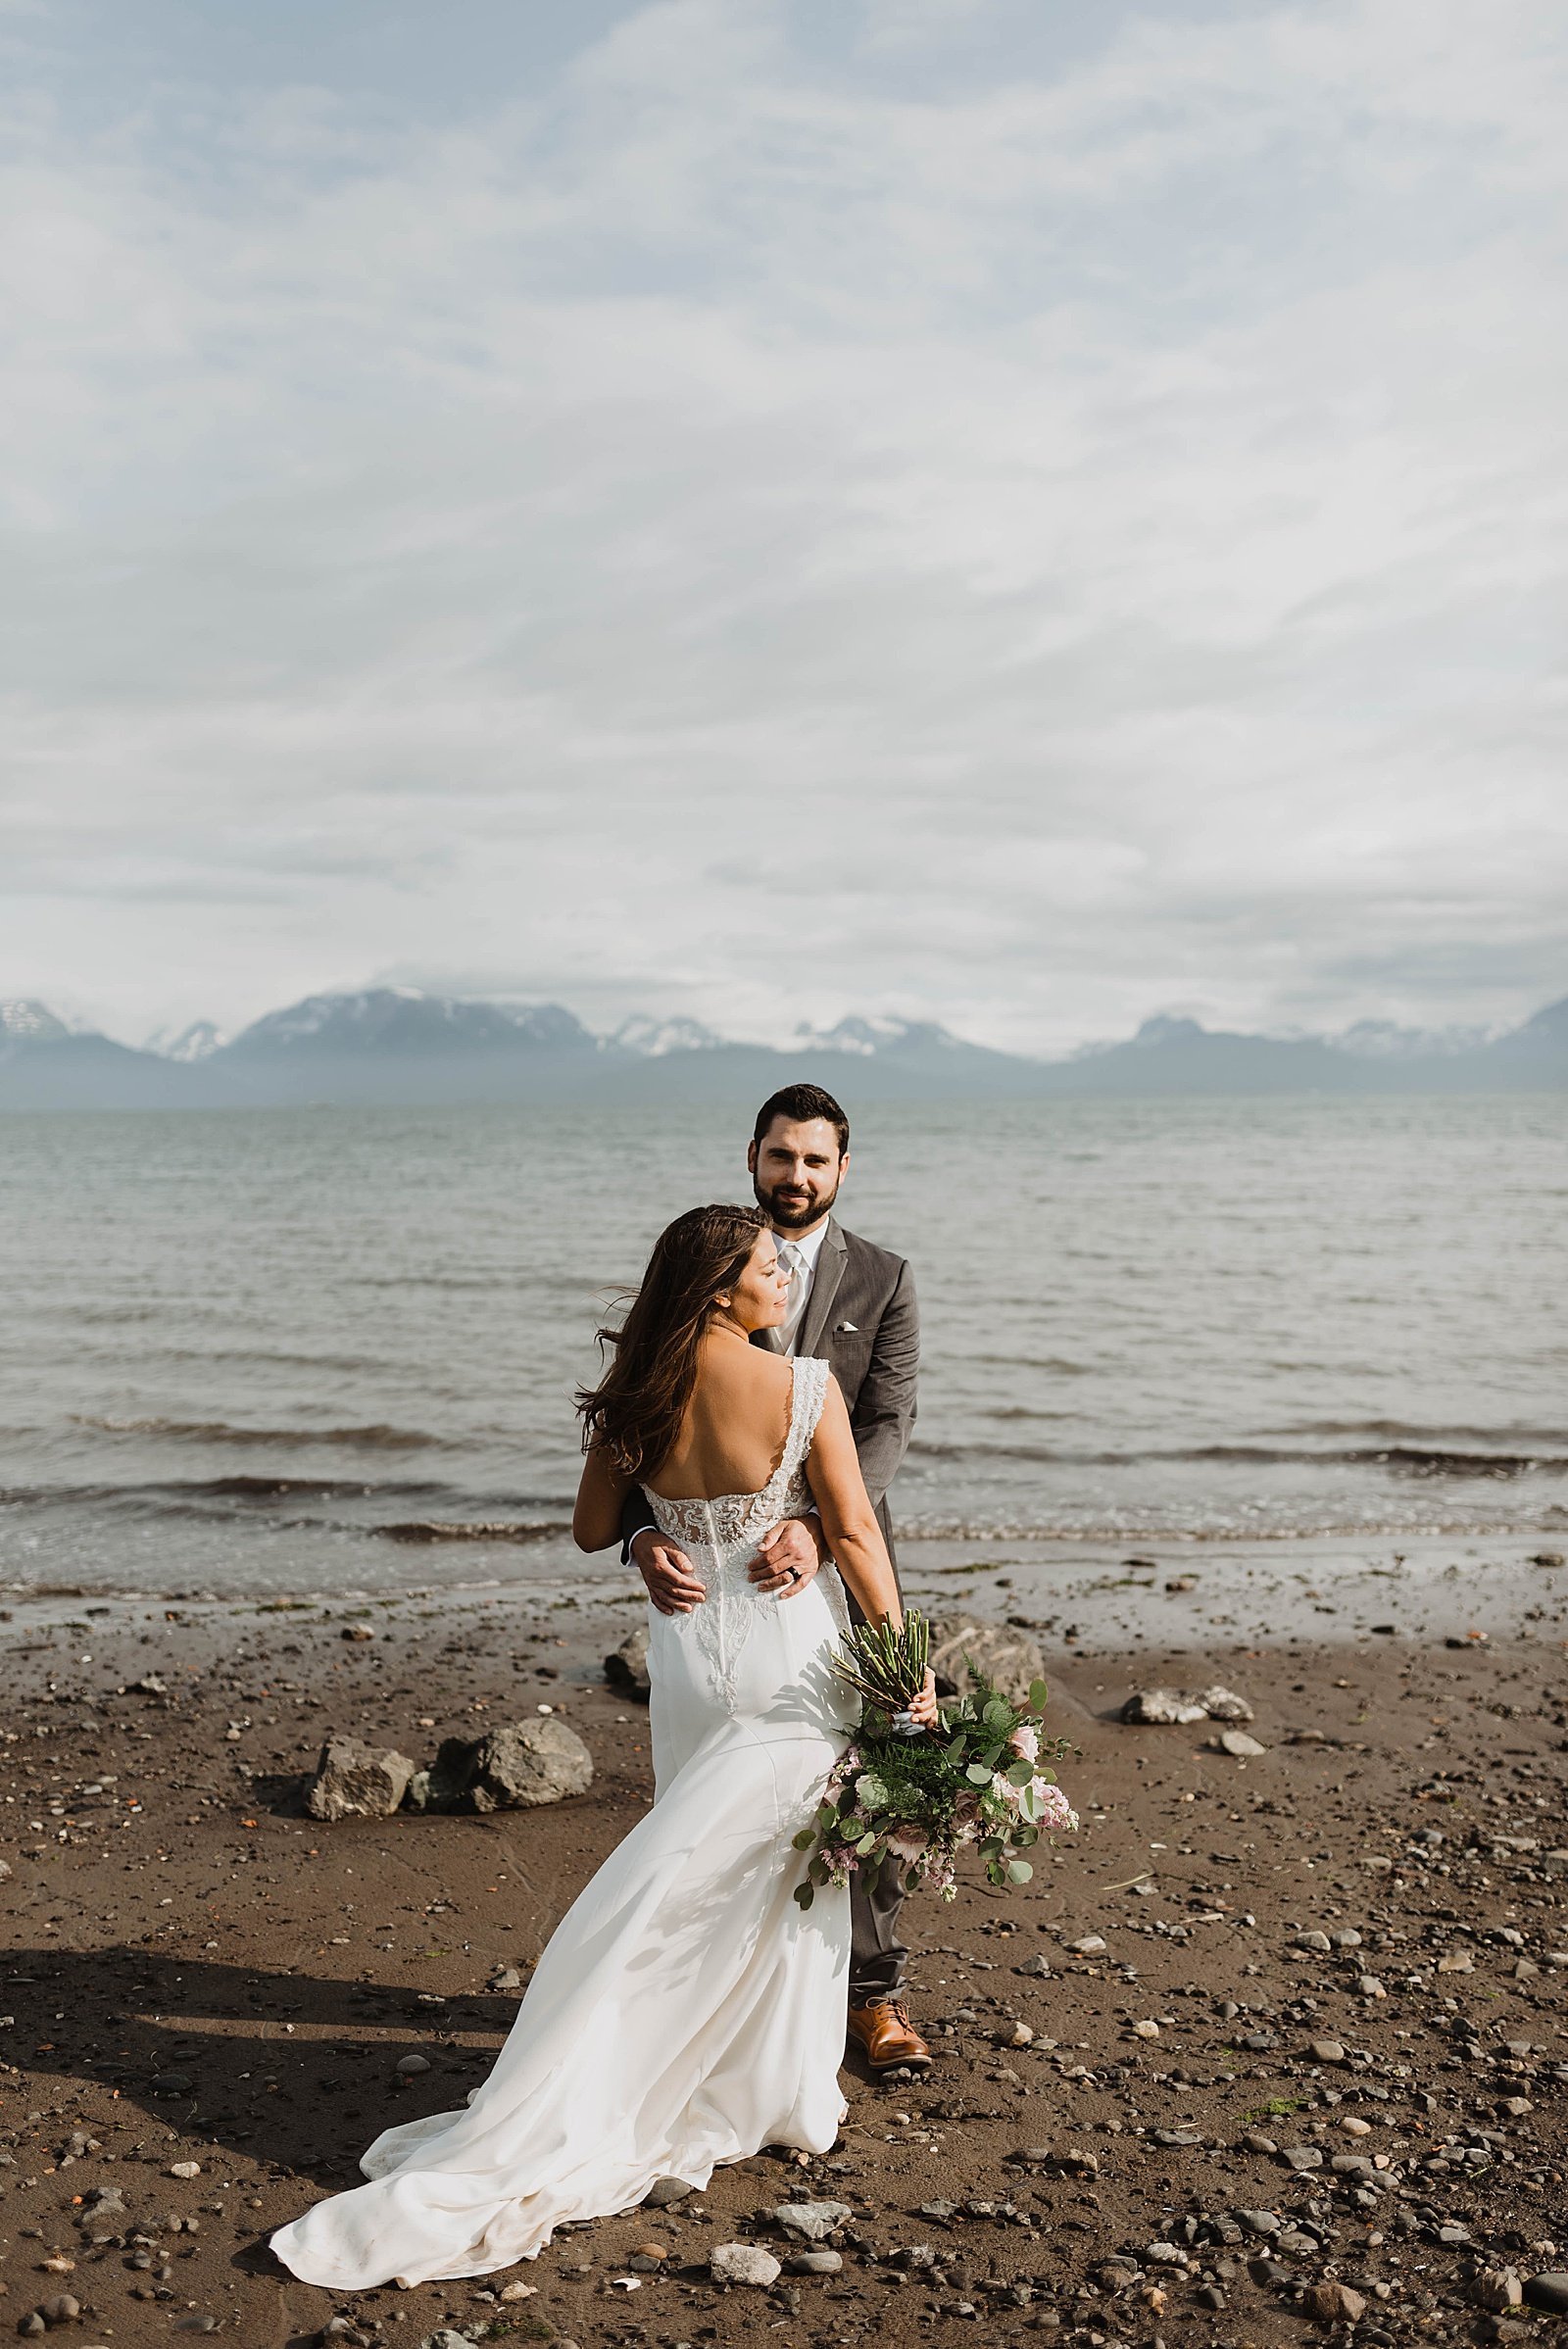  Bride and groom with water and mountains behind them by Alaska Wedding Photographer, Theresa McDonald 